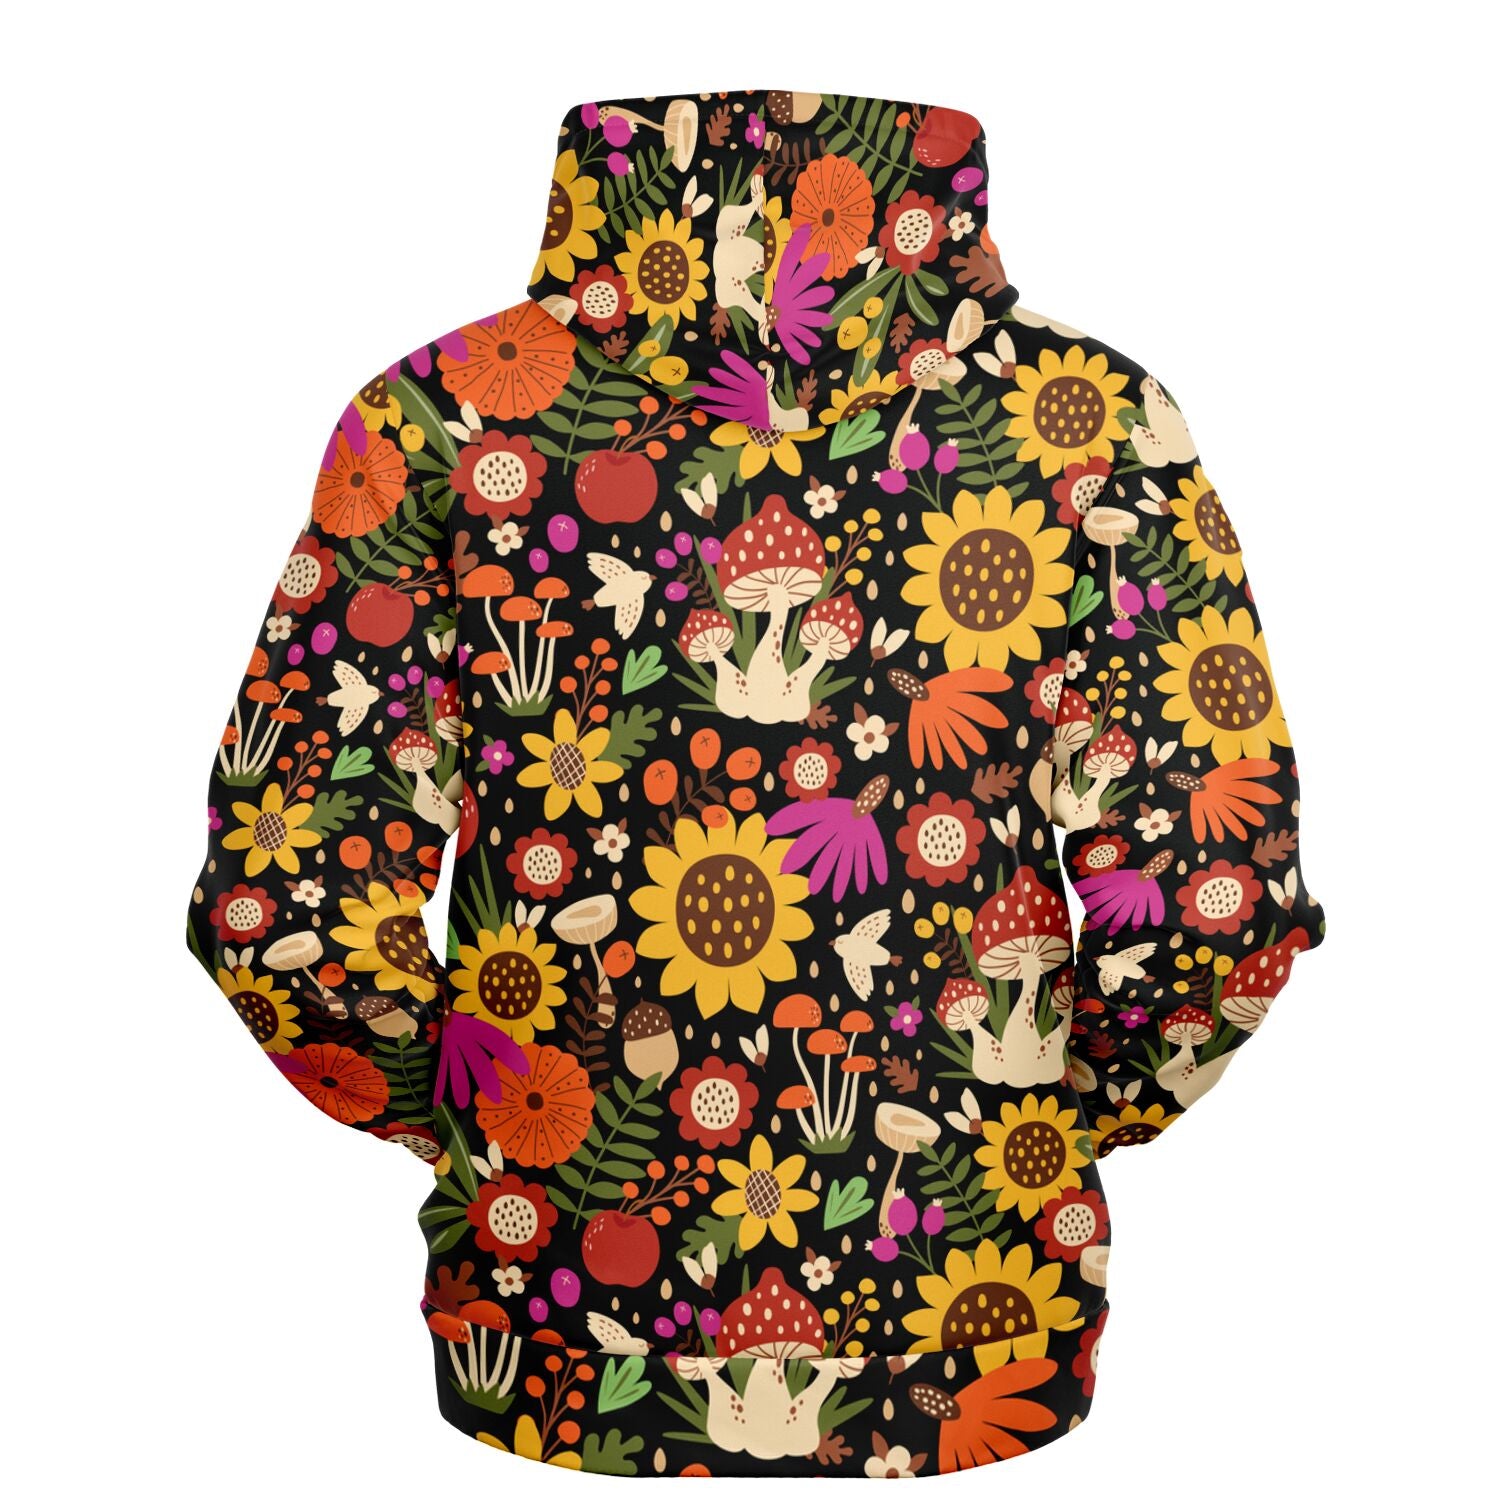 Mushroom Hoodie, Sunflower Floral Birds Pullover Men Women Adult Aesthetic Graphic Cotton Hooded Sweatshirt with Pockets Starcove Fashion